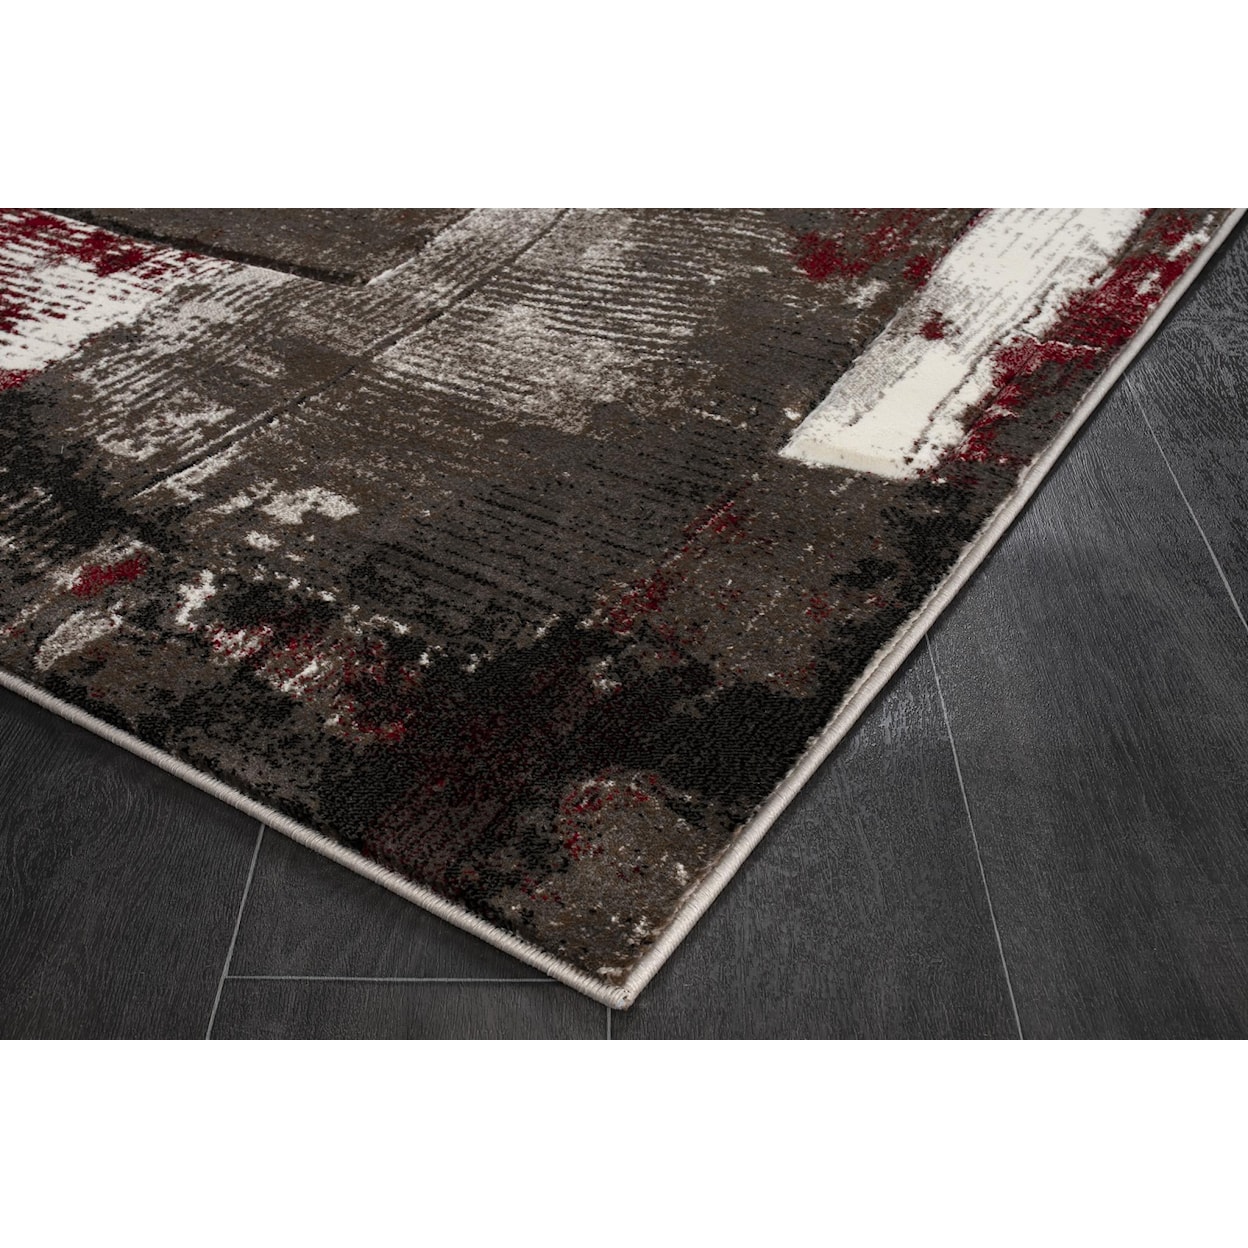 MDA Rugs Rhodes Collection RHODES 8X11 RED/BROWN AREA RUG |